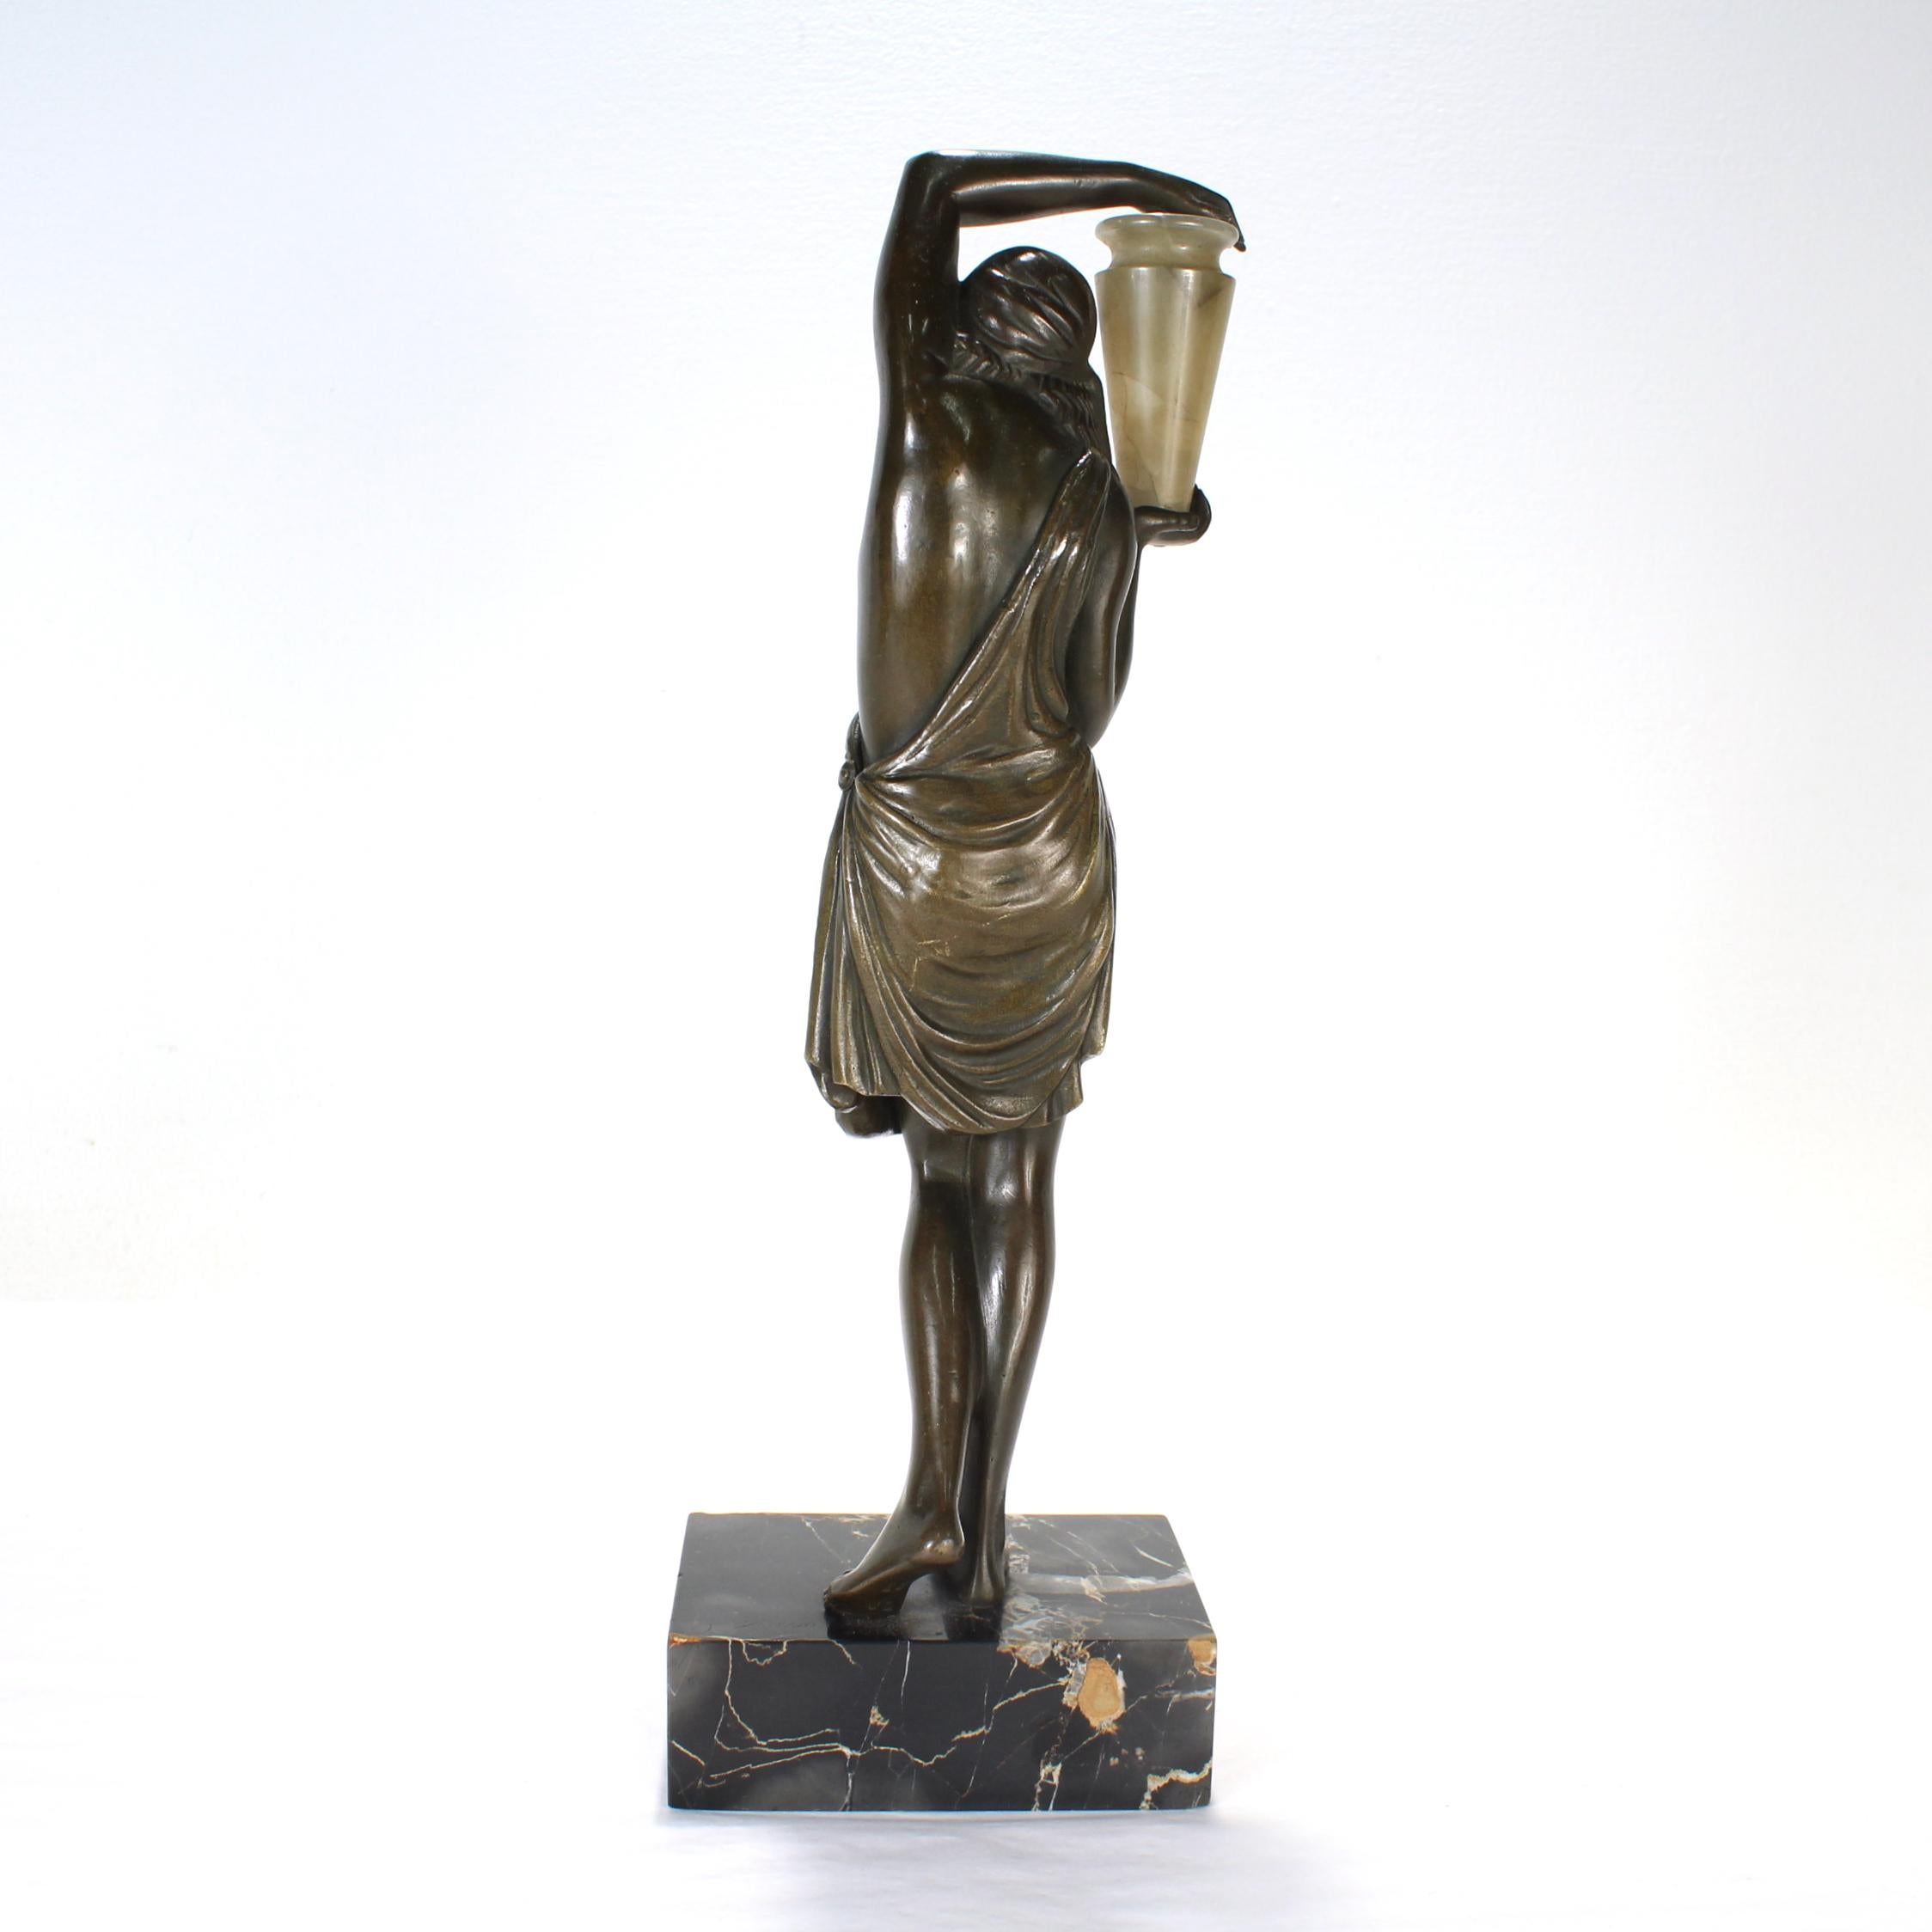 Andreé Guerval French Art Deco Bronze & Onyx Sculpture of Chysis / Woman & Urn For Sale 2